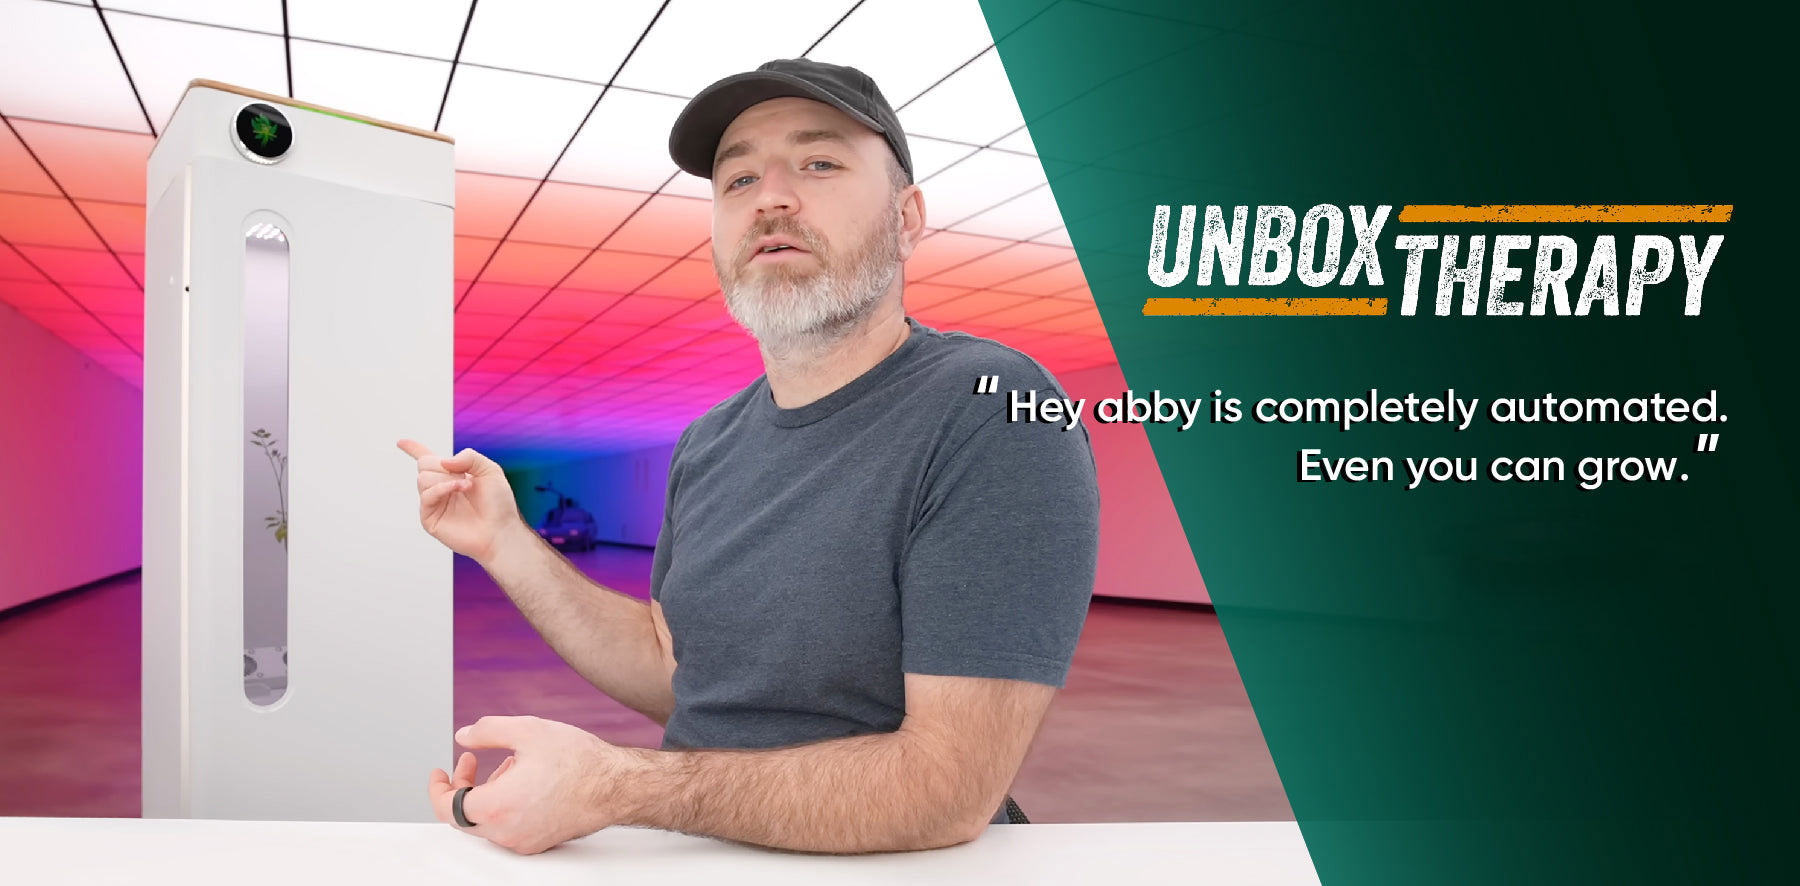 Hey abby grow box reviewed by Unbox Therapy